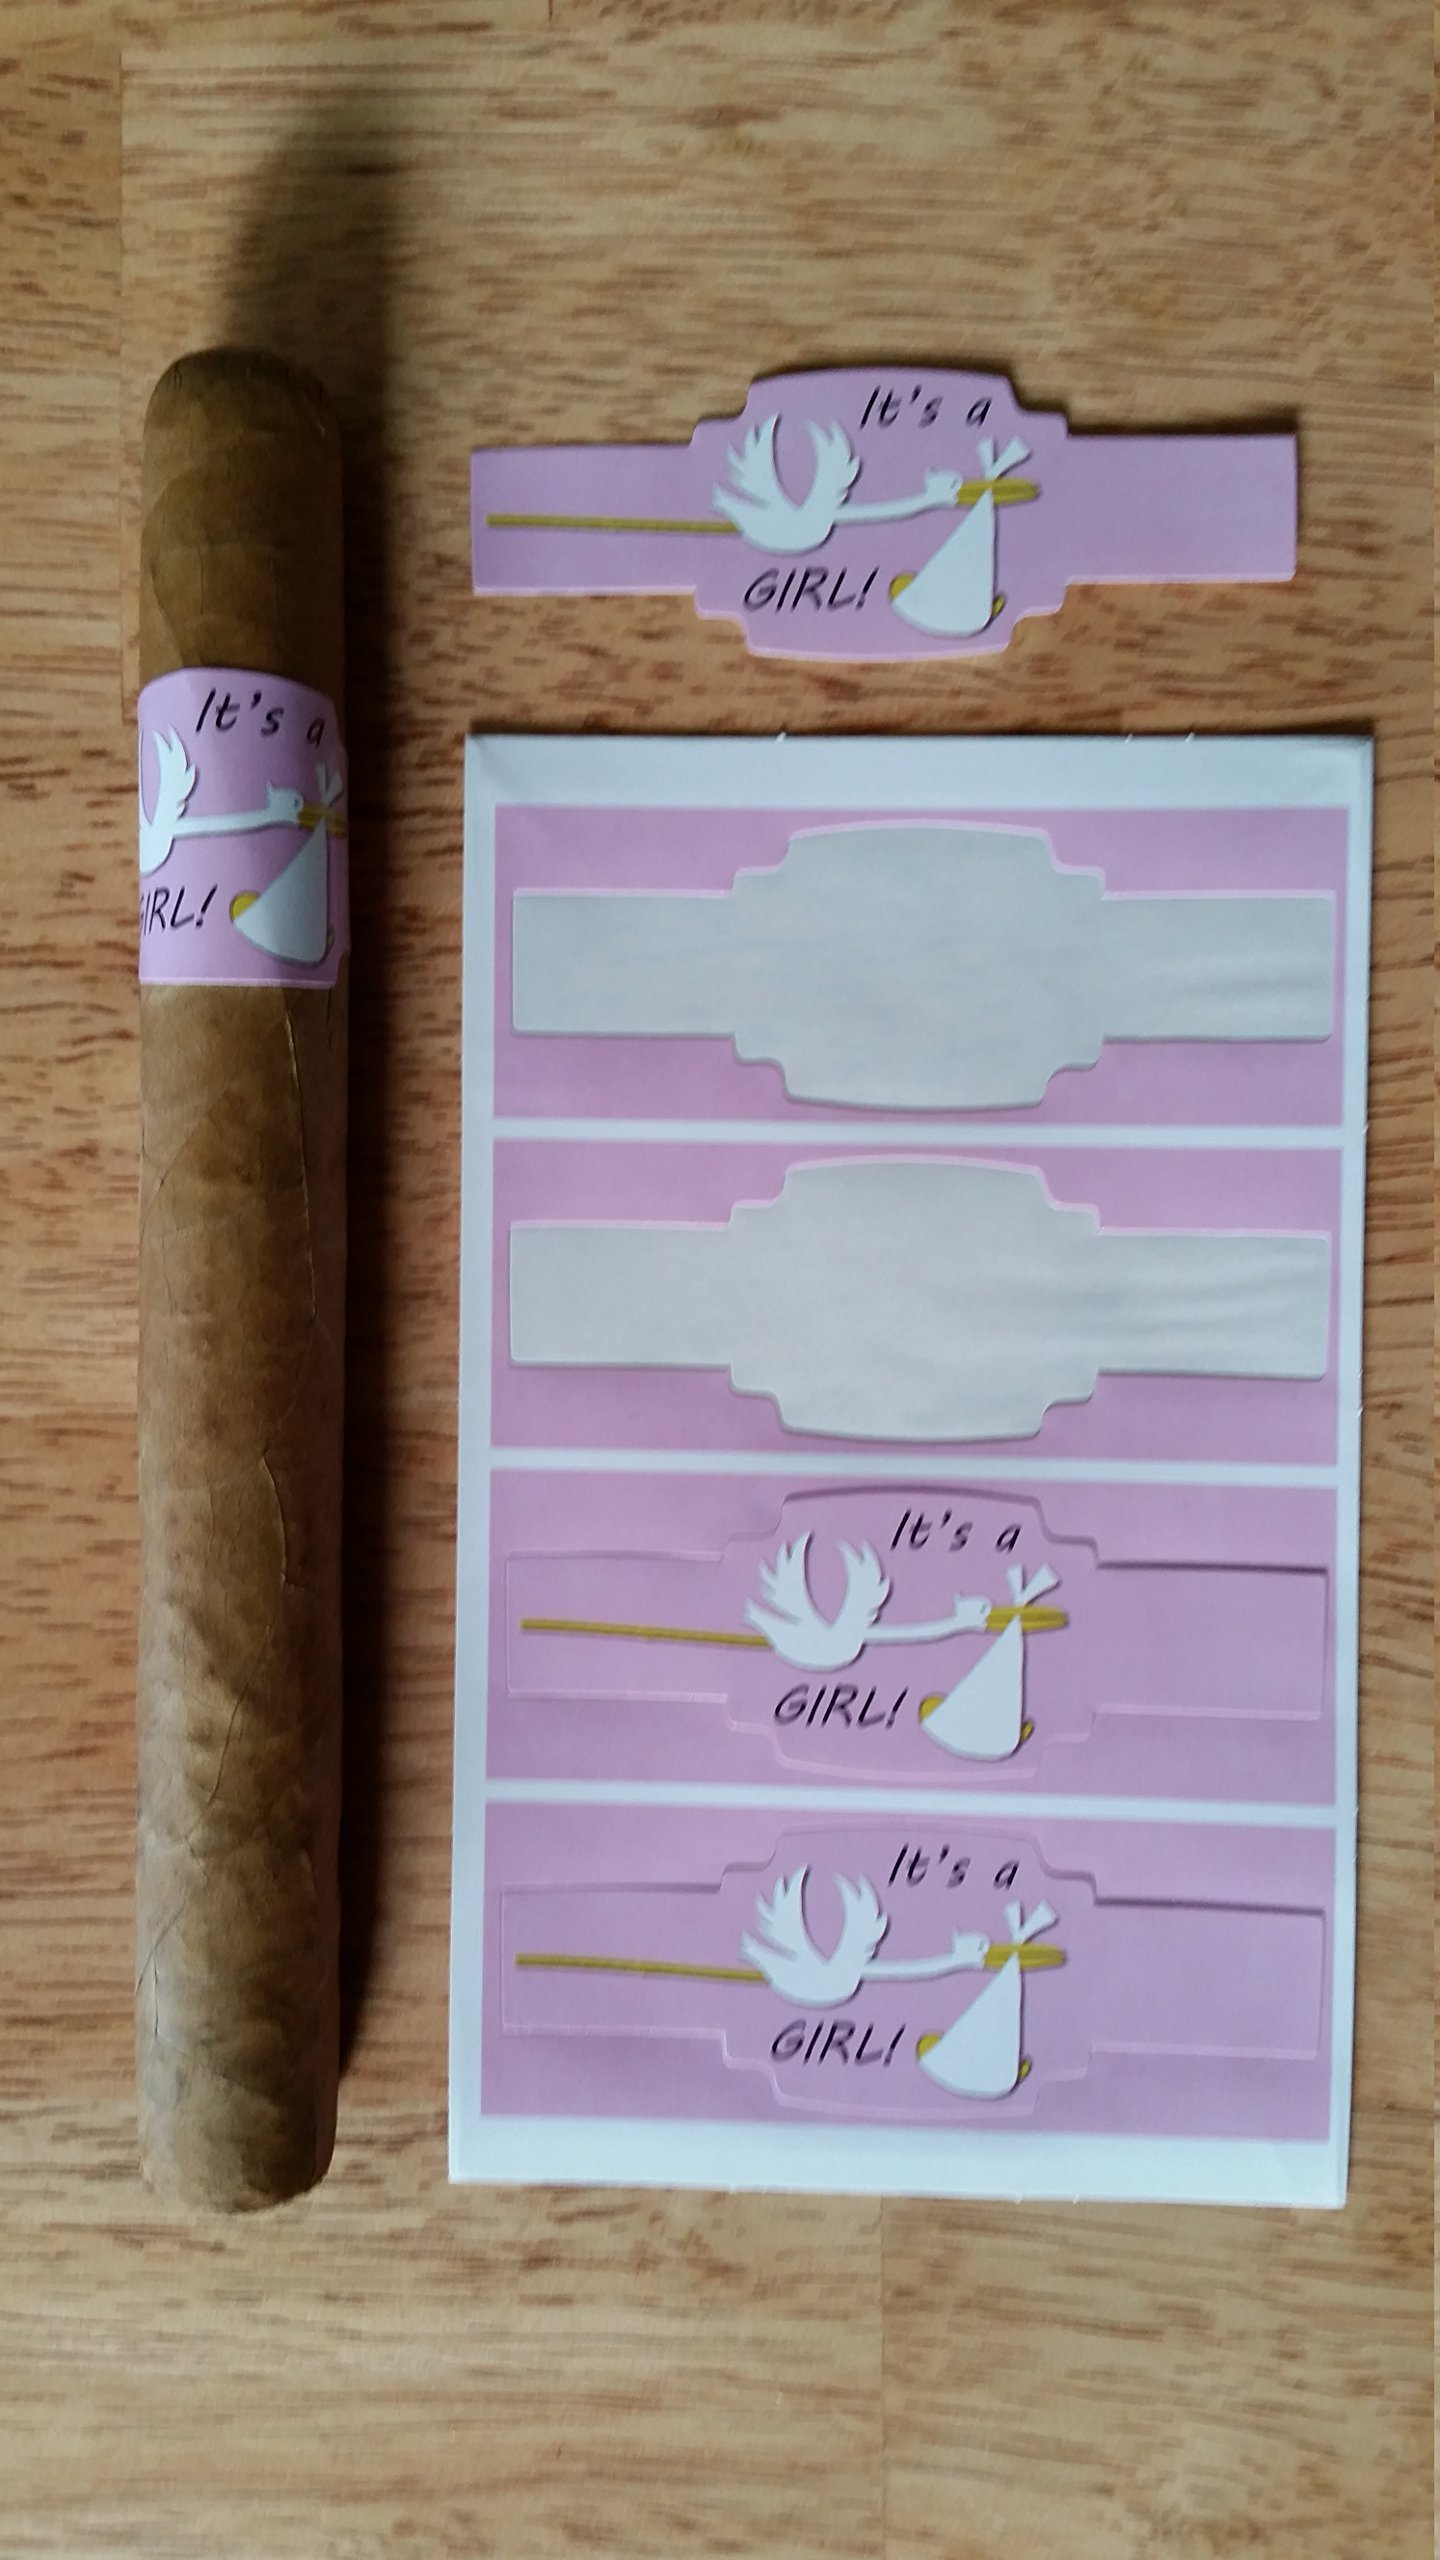 It's a GIRL! (Stork) 20 Pack of Self-Adhering Cigar Bands / Labels